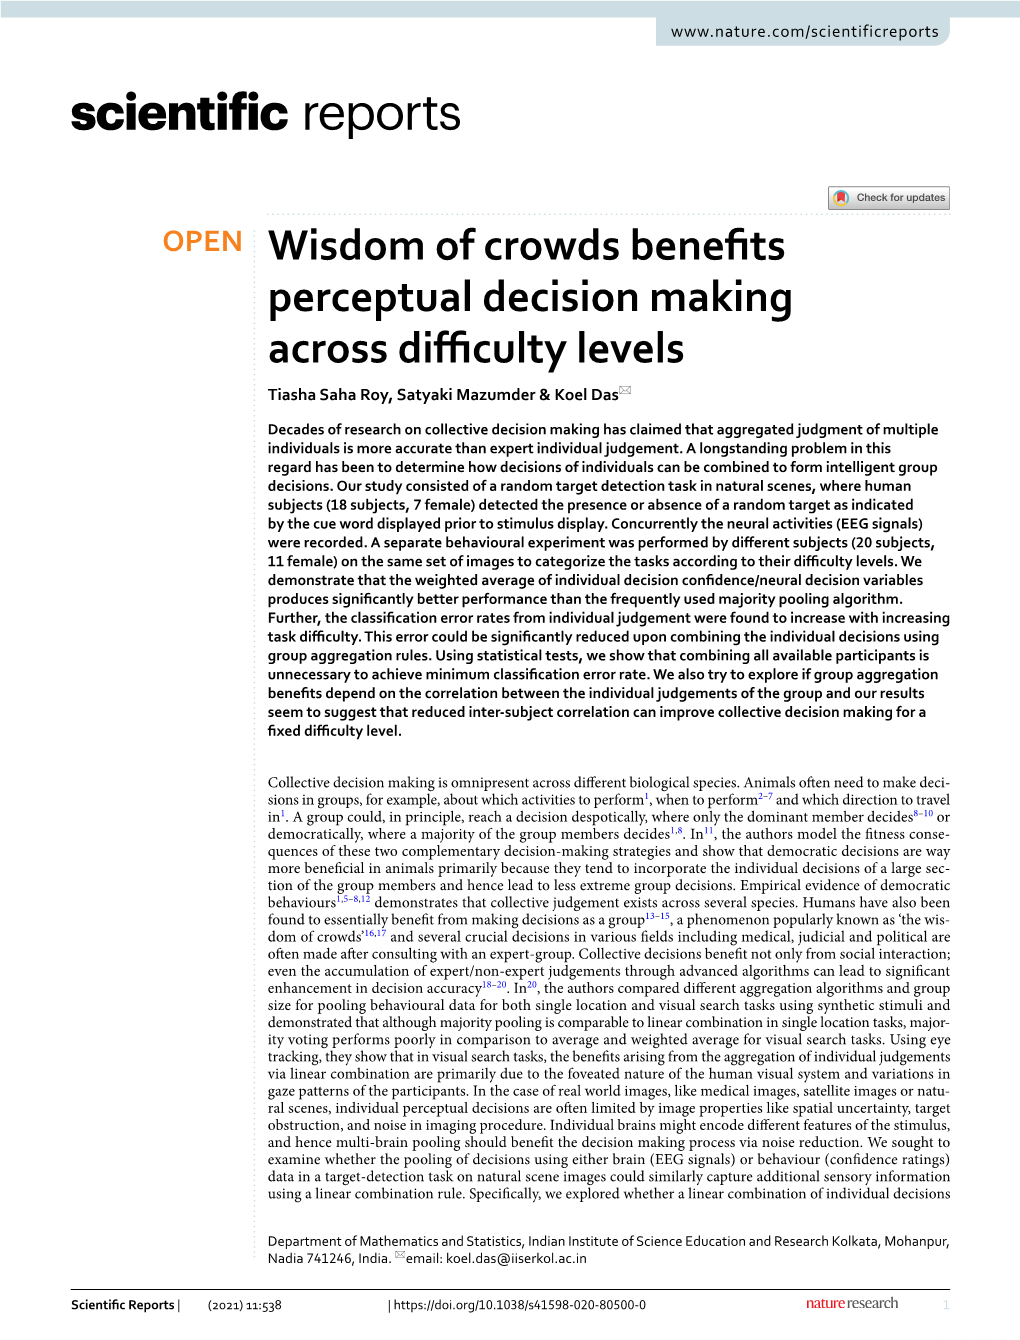 Wisdom of Crowds Benefits Perceptual Decision Making Across Difficulty Levels